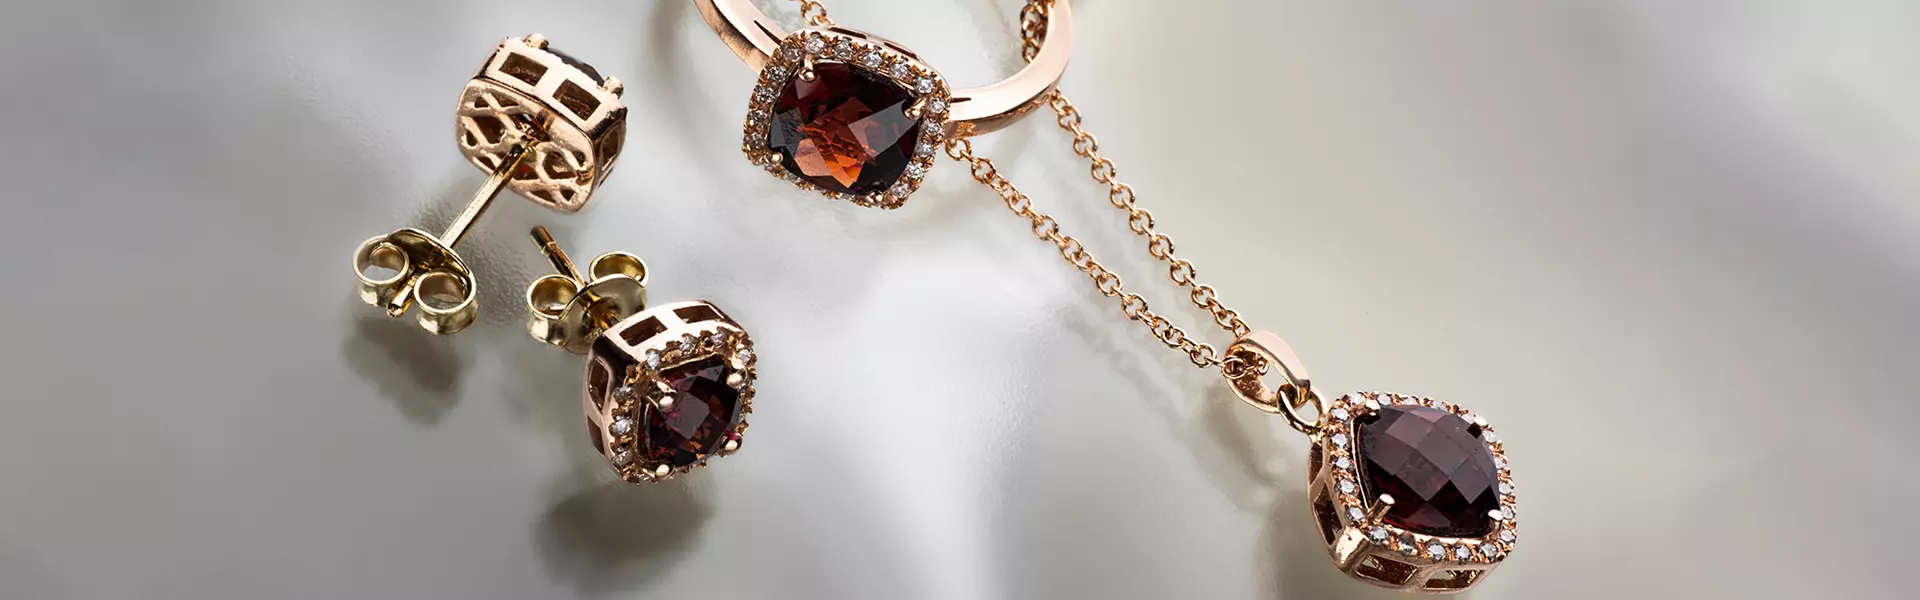 14K Rose Gold Jewelry with Garnet and Diamonds